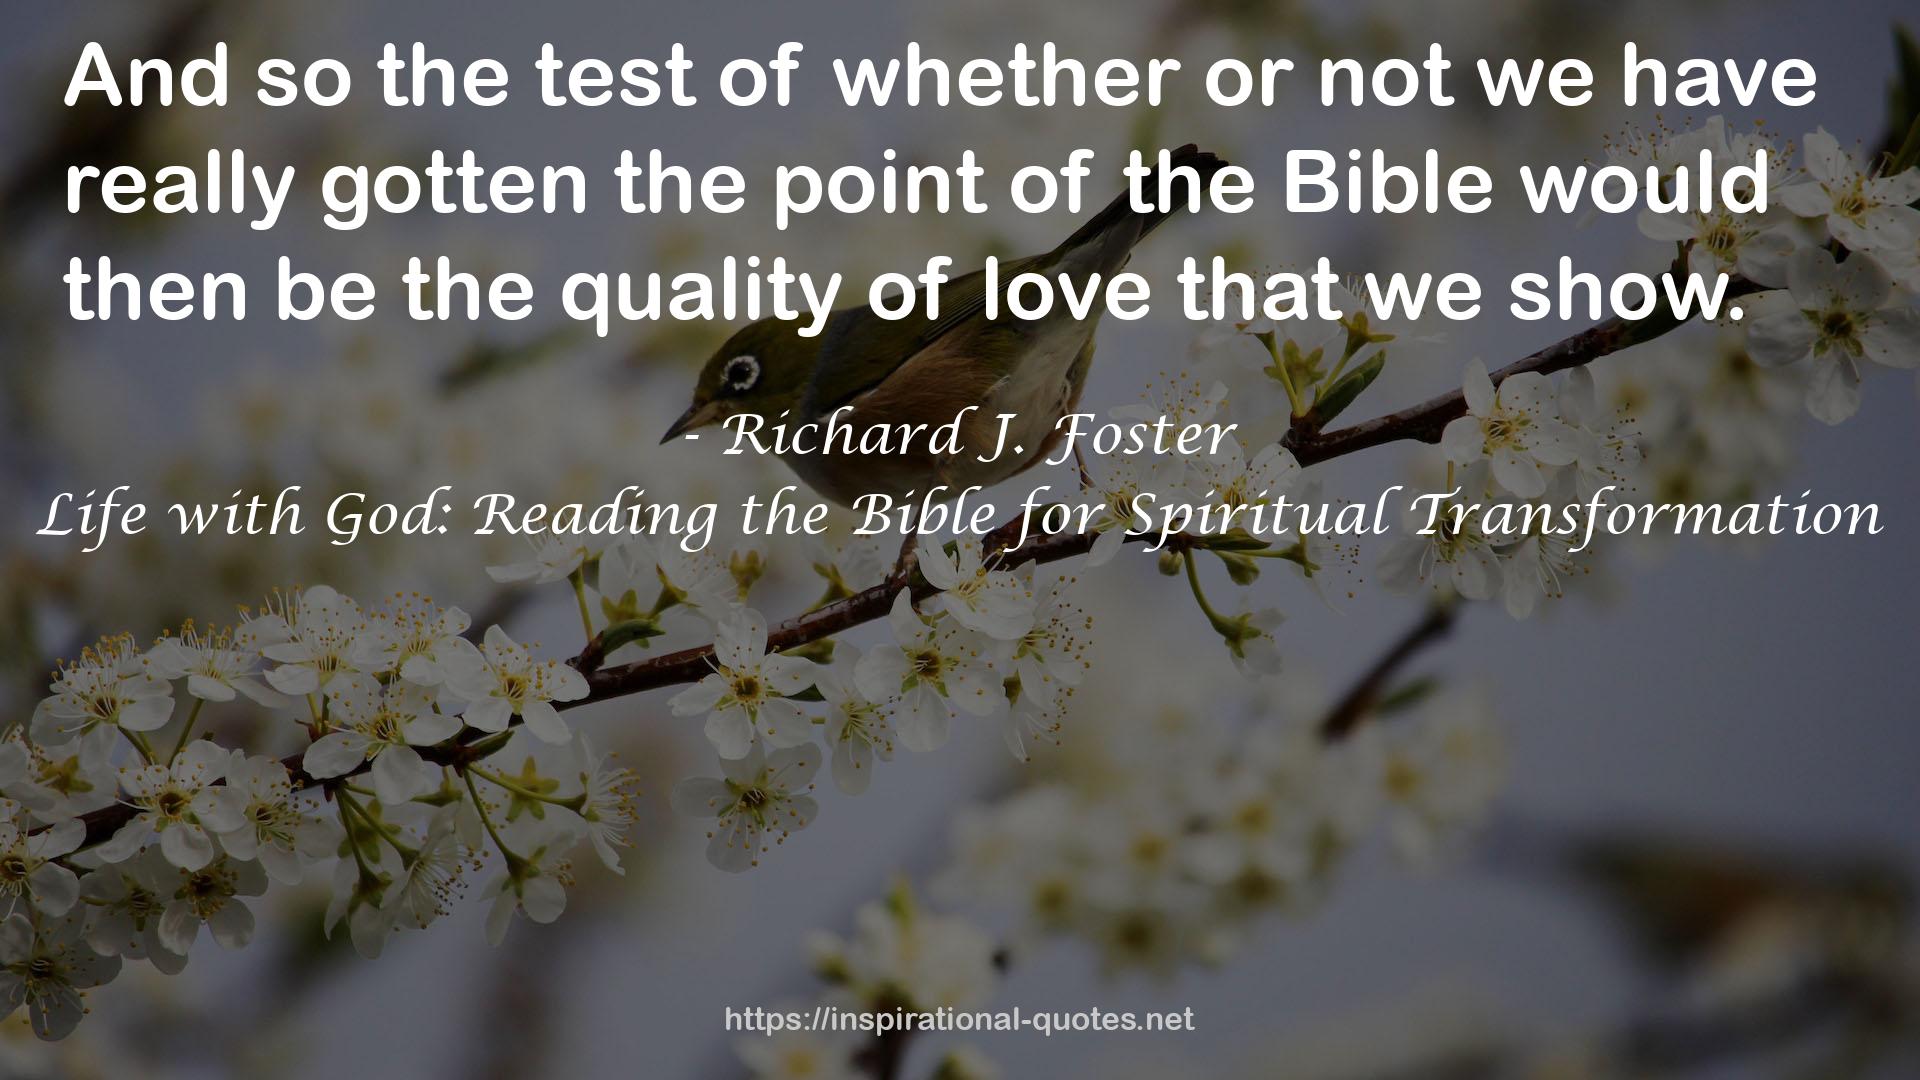 Life with God: Reading the Bible for Spiritual Transformation QUOTES